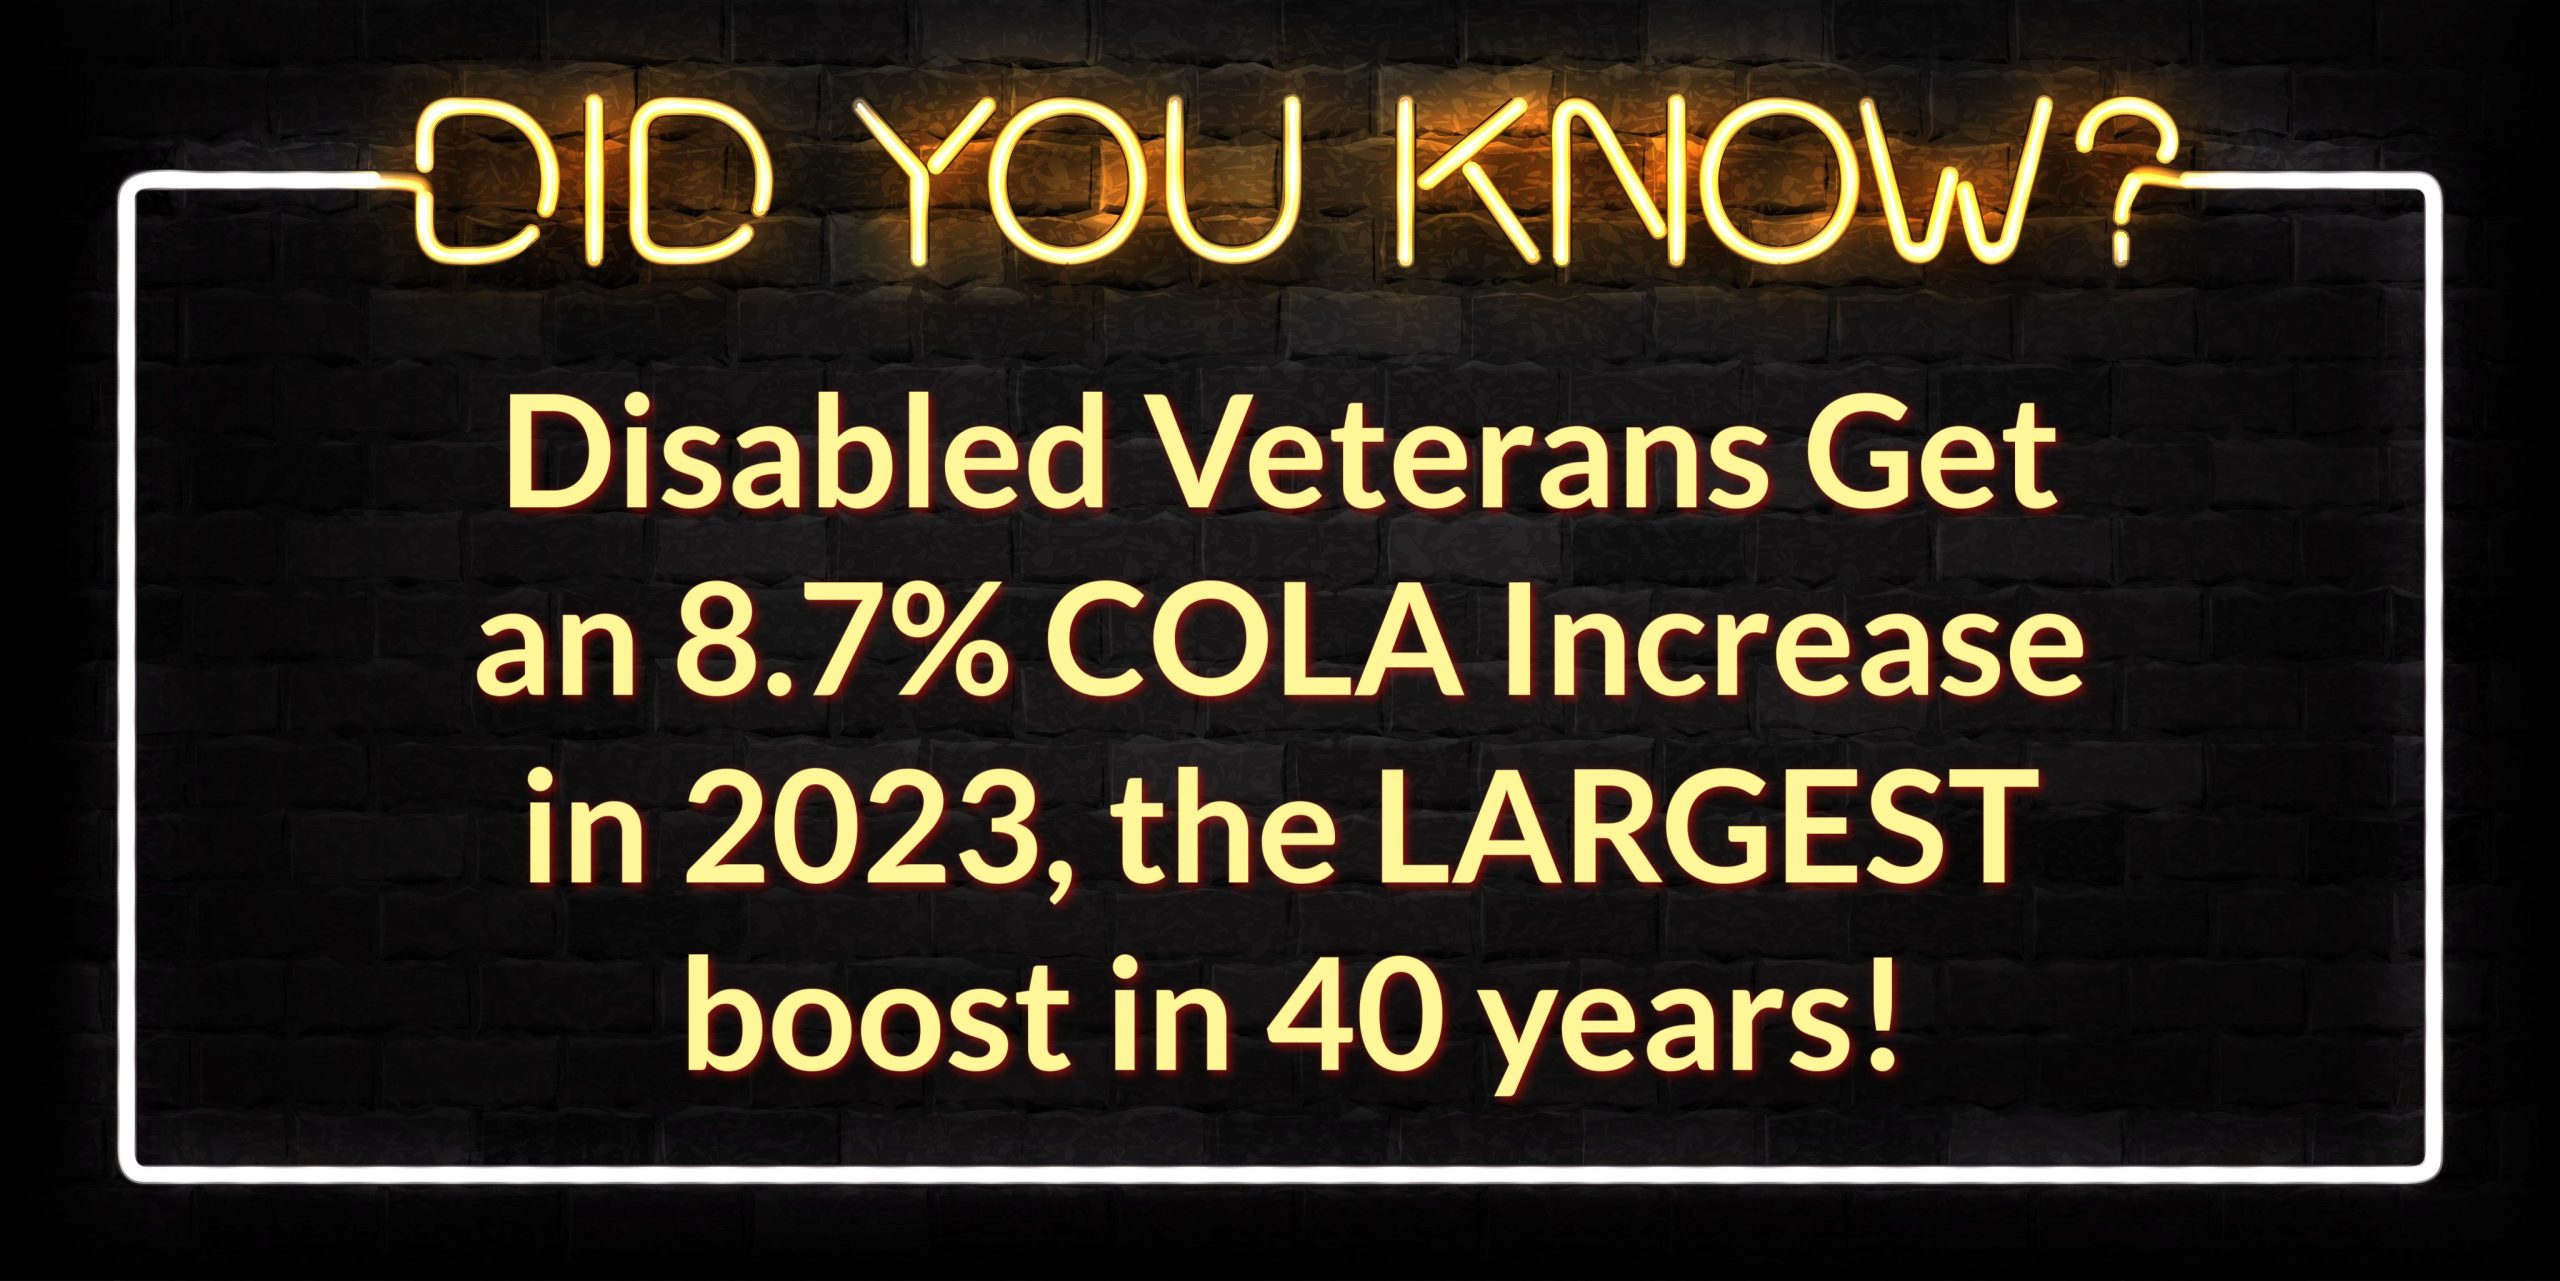 2023 VA Disability Rates Will Increase by 8.7%